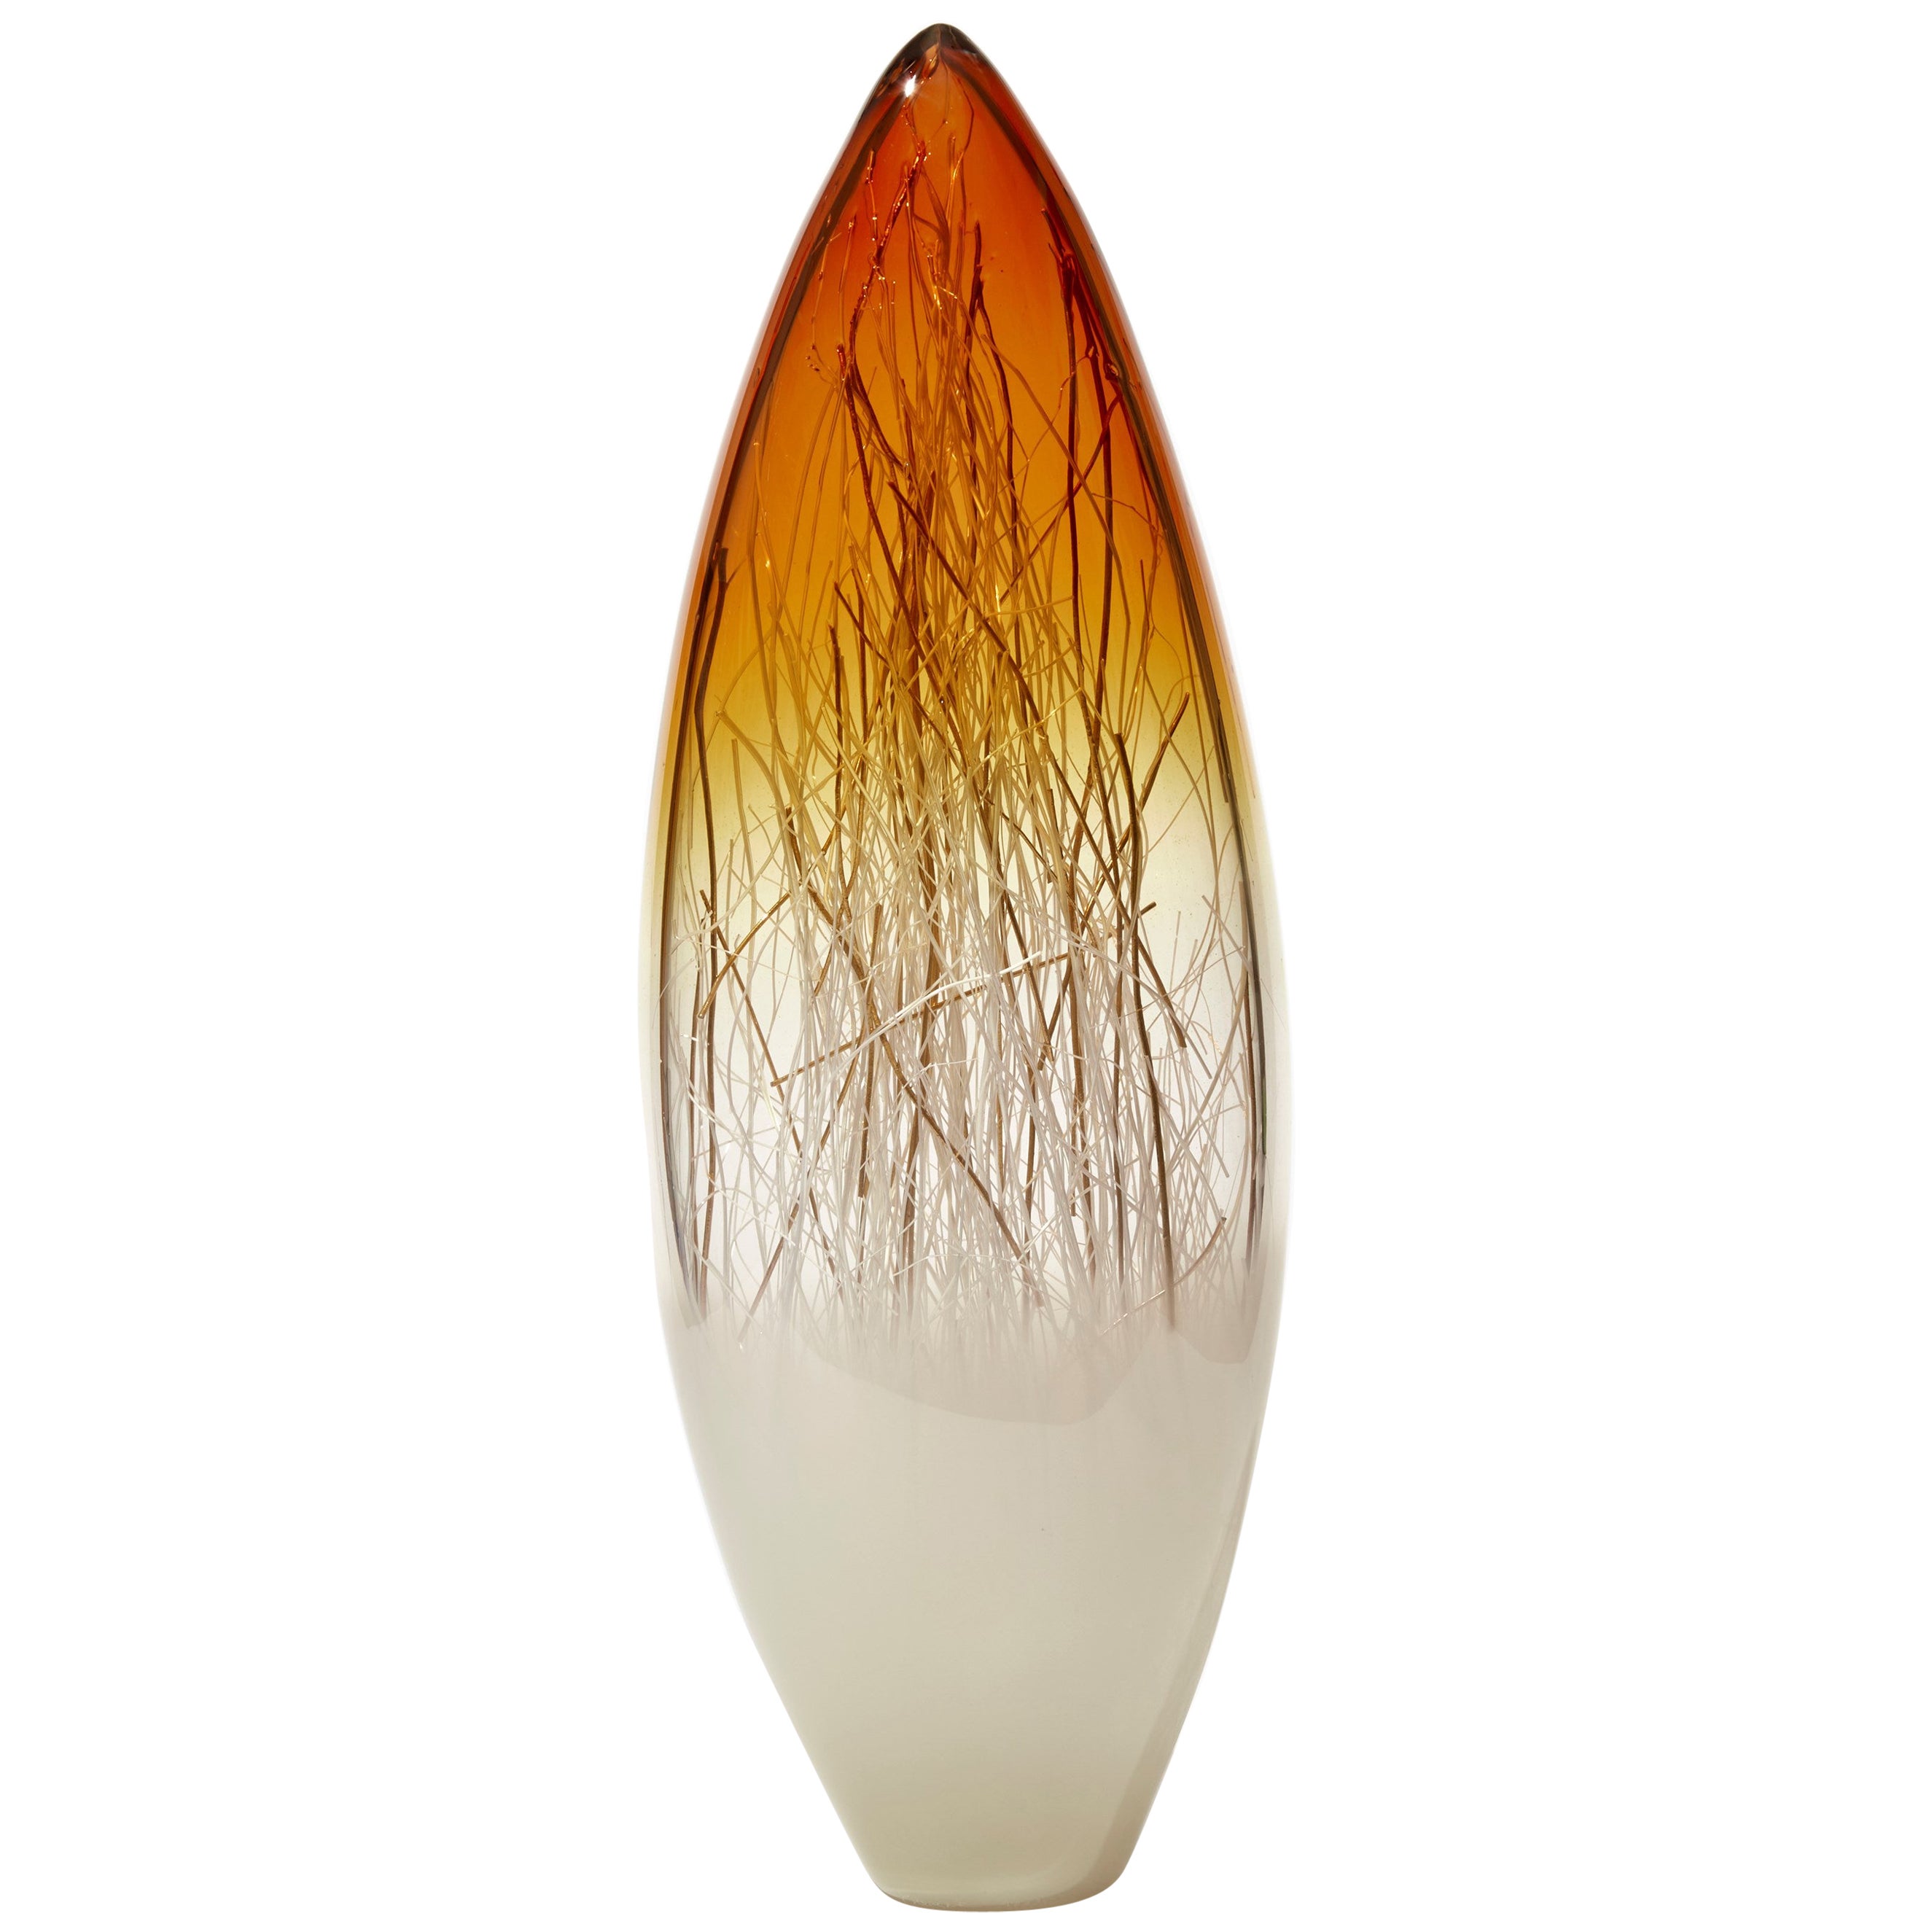 Ore in Amber & Ecru with Gold, a Glass Sculpture by Enemark & Thompson